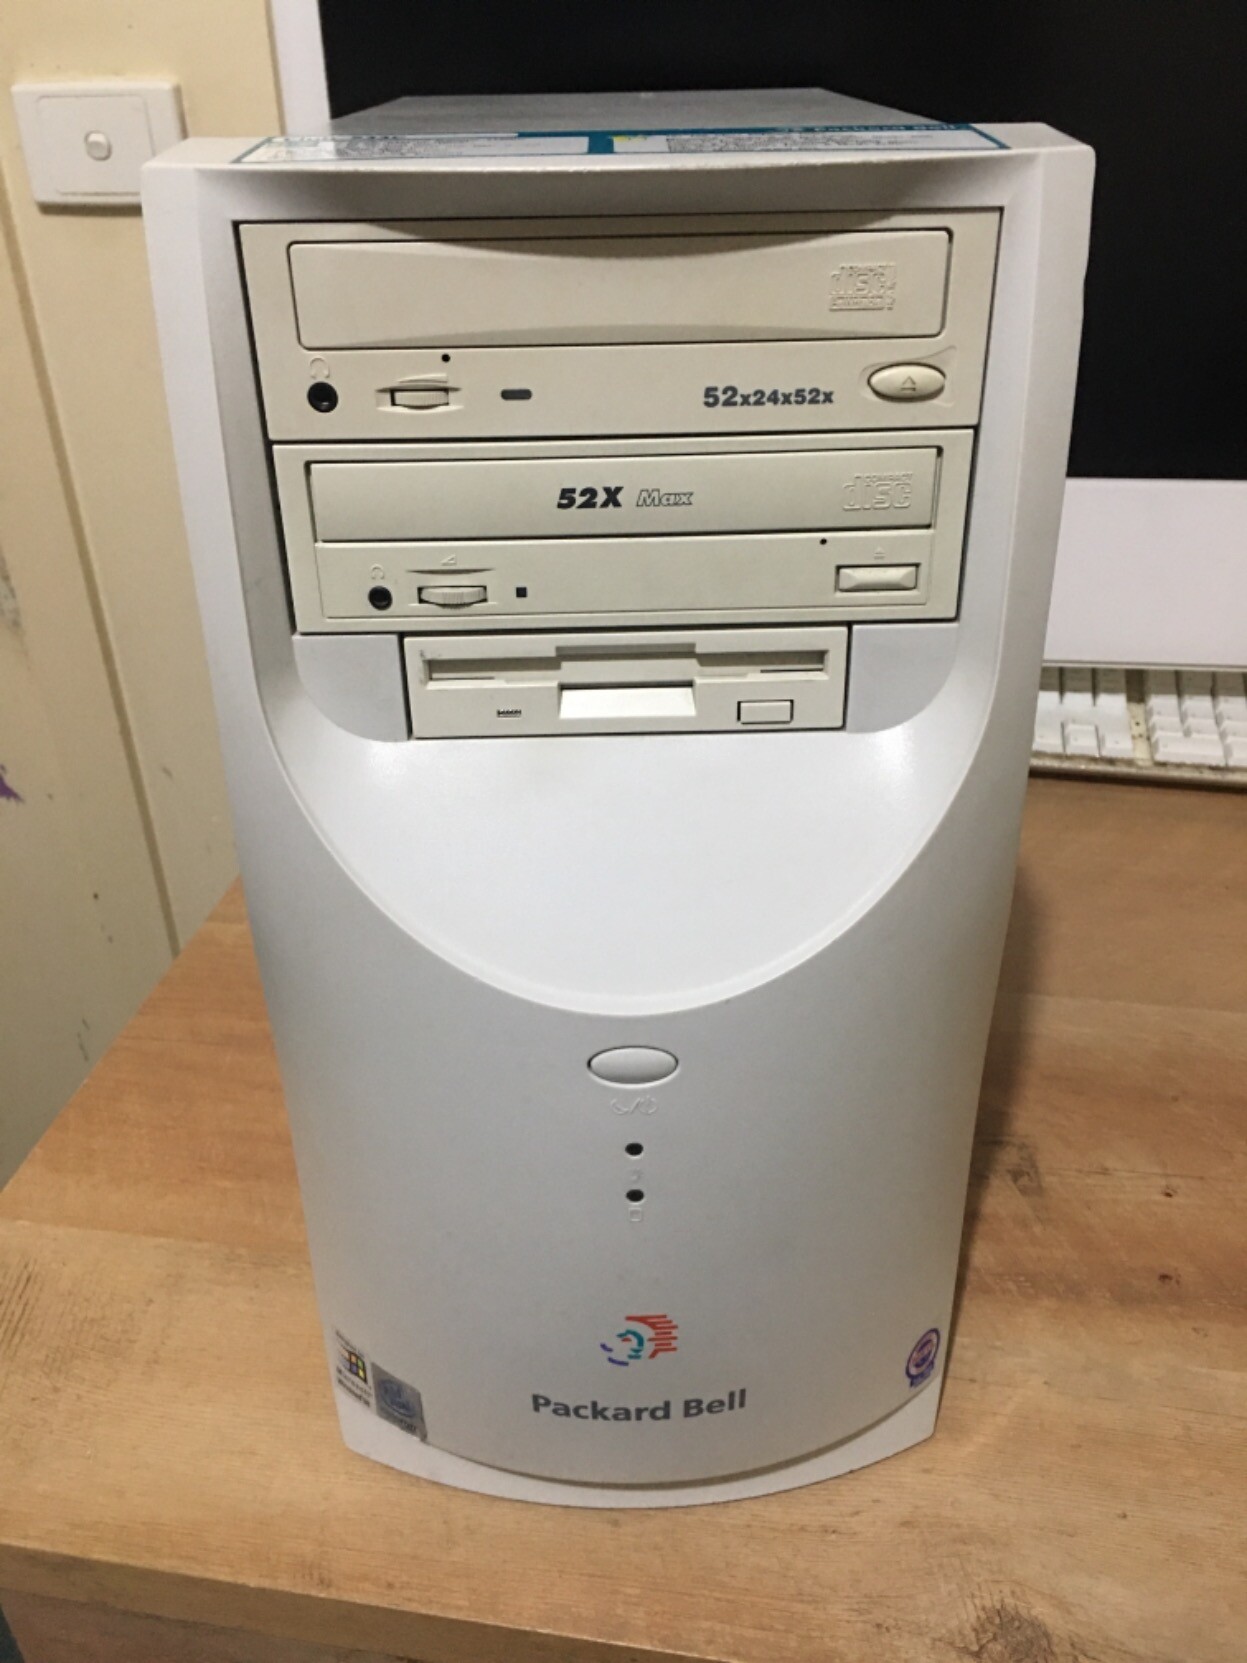 The front of the PC on my desk in front of my iMac. It has two CD drives and a floppy disk drive. The PC is a white colour.